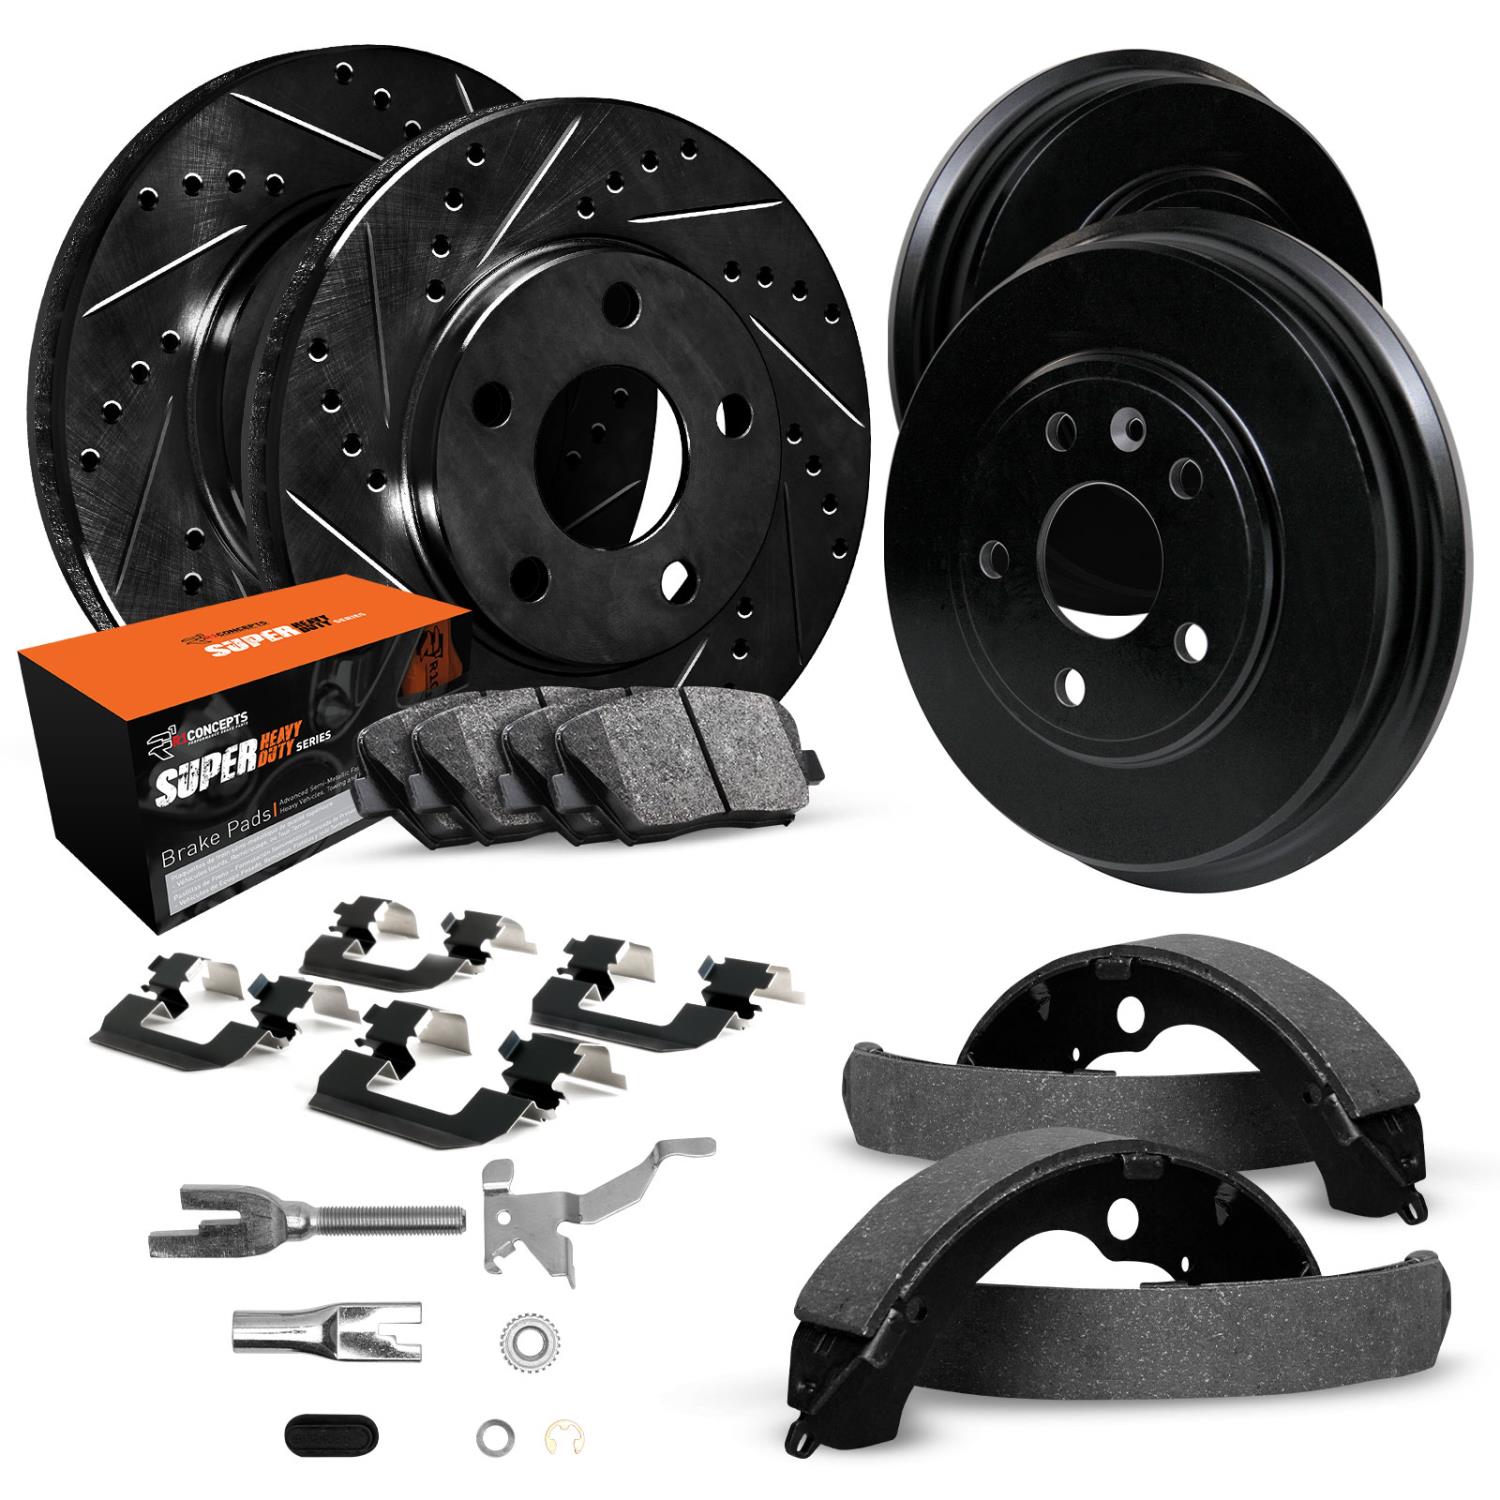 E-Line Slotted Black Brake Rotor & Drum Set w/Super-Duty Pads, Shoes, Hardware/Adjusters, 1994-1996 Ford/Lincoln/Mercury/Mazda